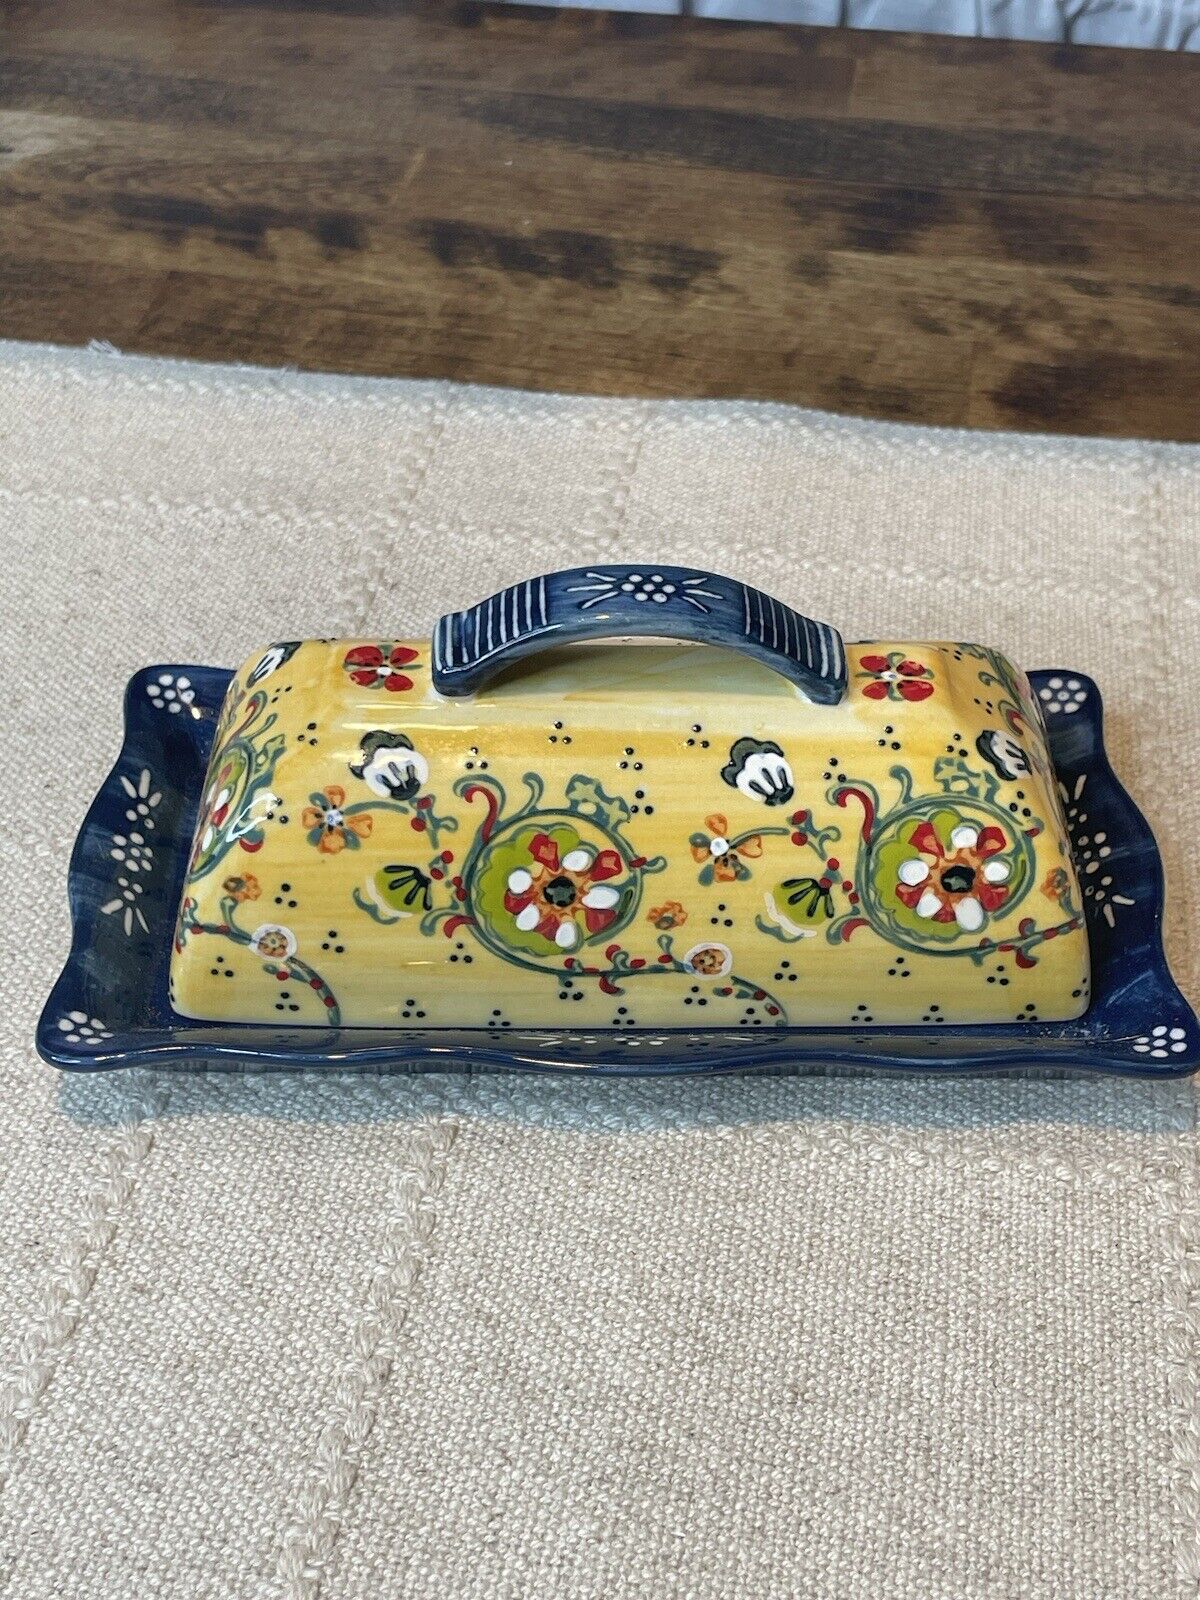 Anthropologie Hand Painted Raised Enamel Ceramic Lyna Covered Butter Dish